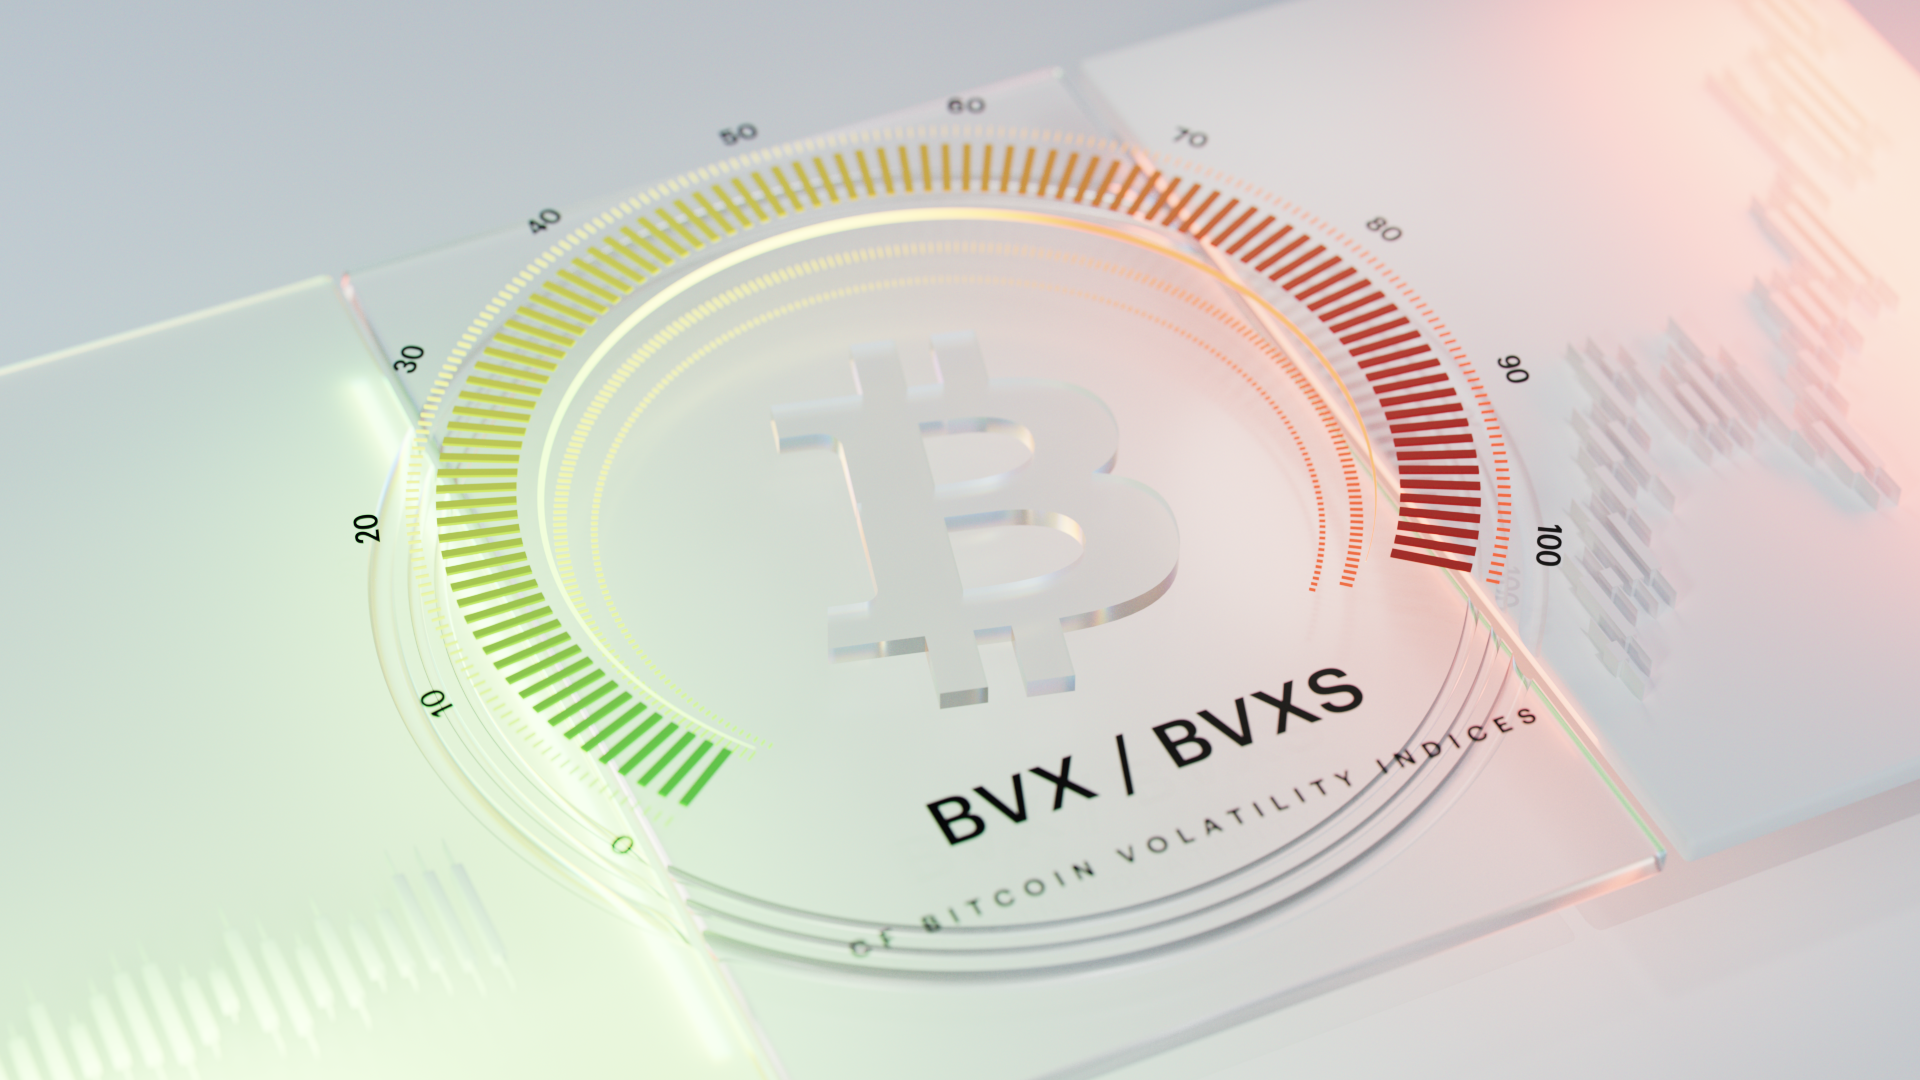 CF Benchmarks launches CF Bitcoin Volatility Index, first direct measure of CME Bitcoin implied volatility